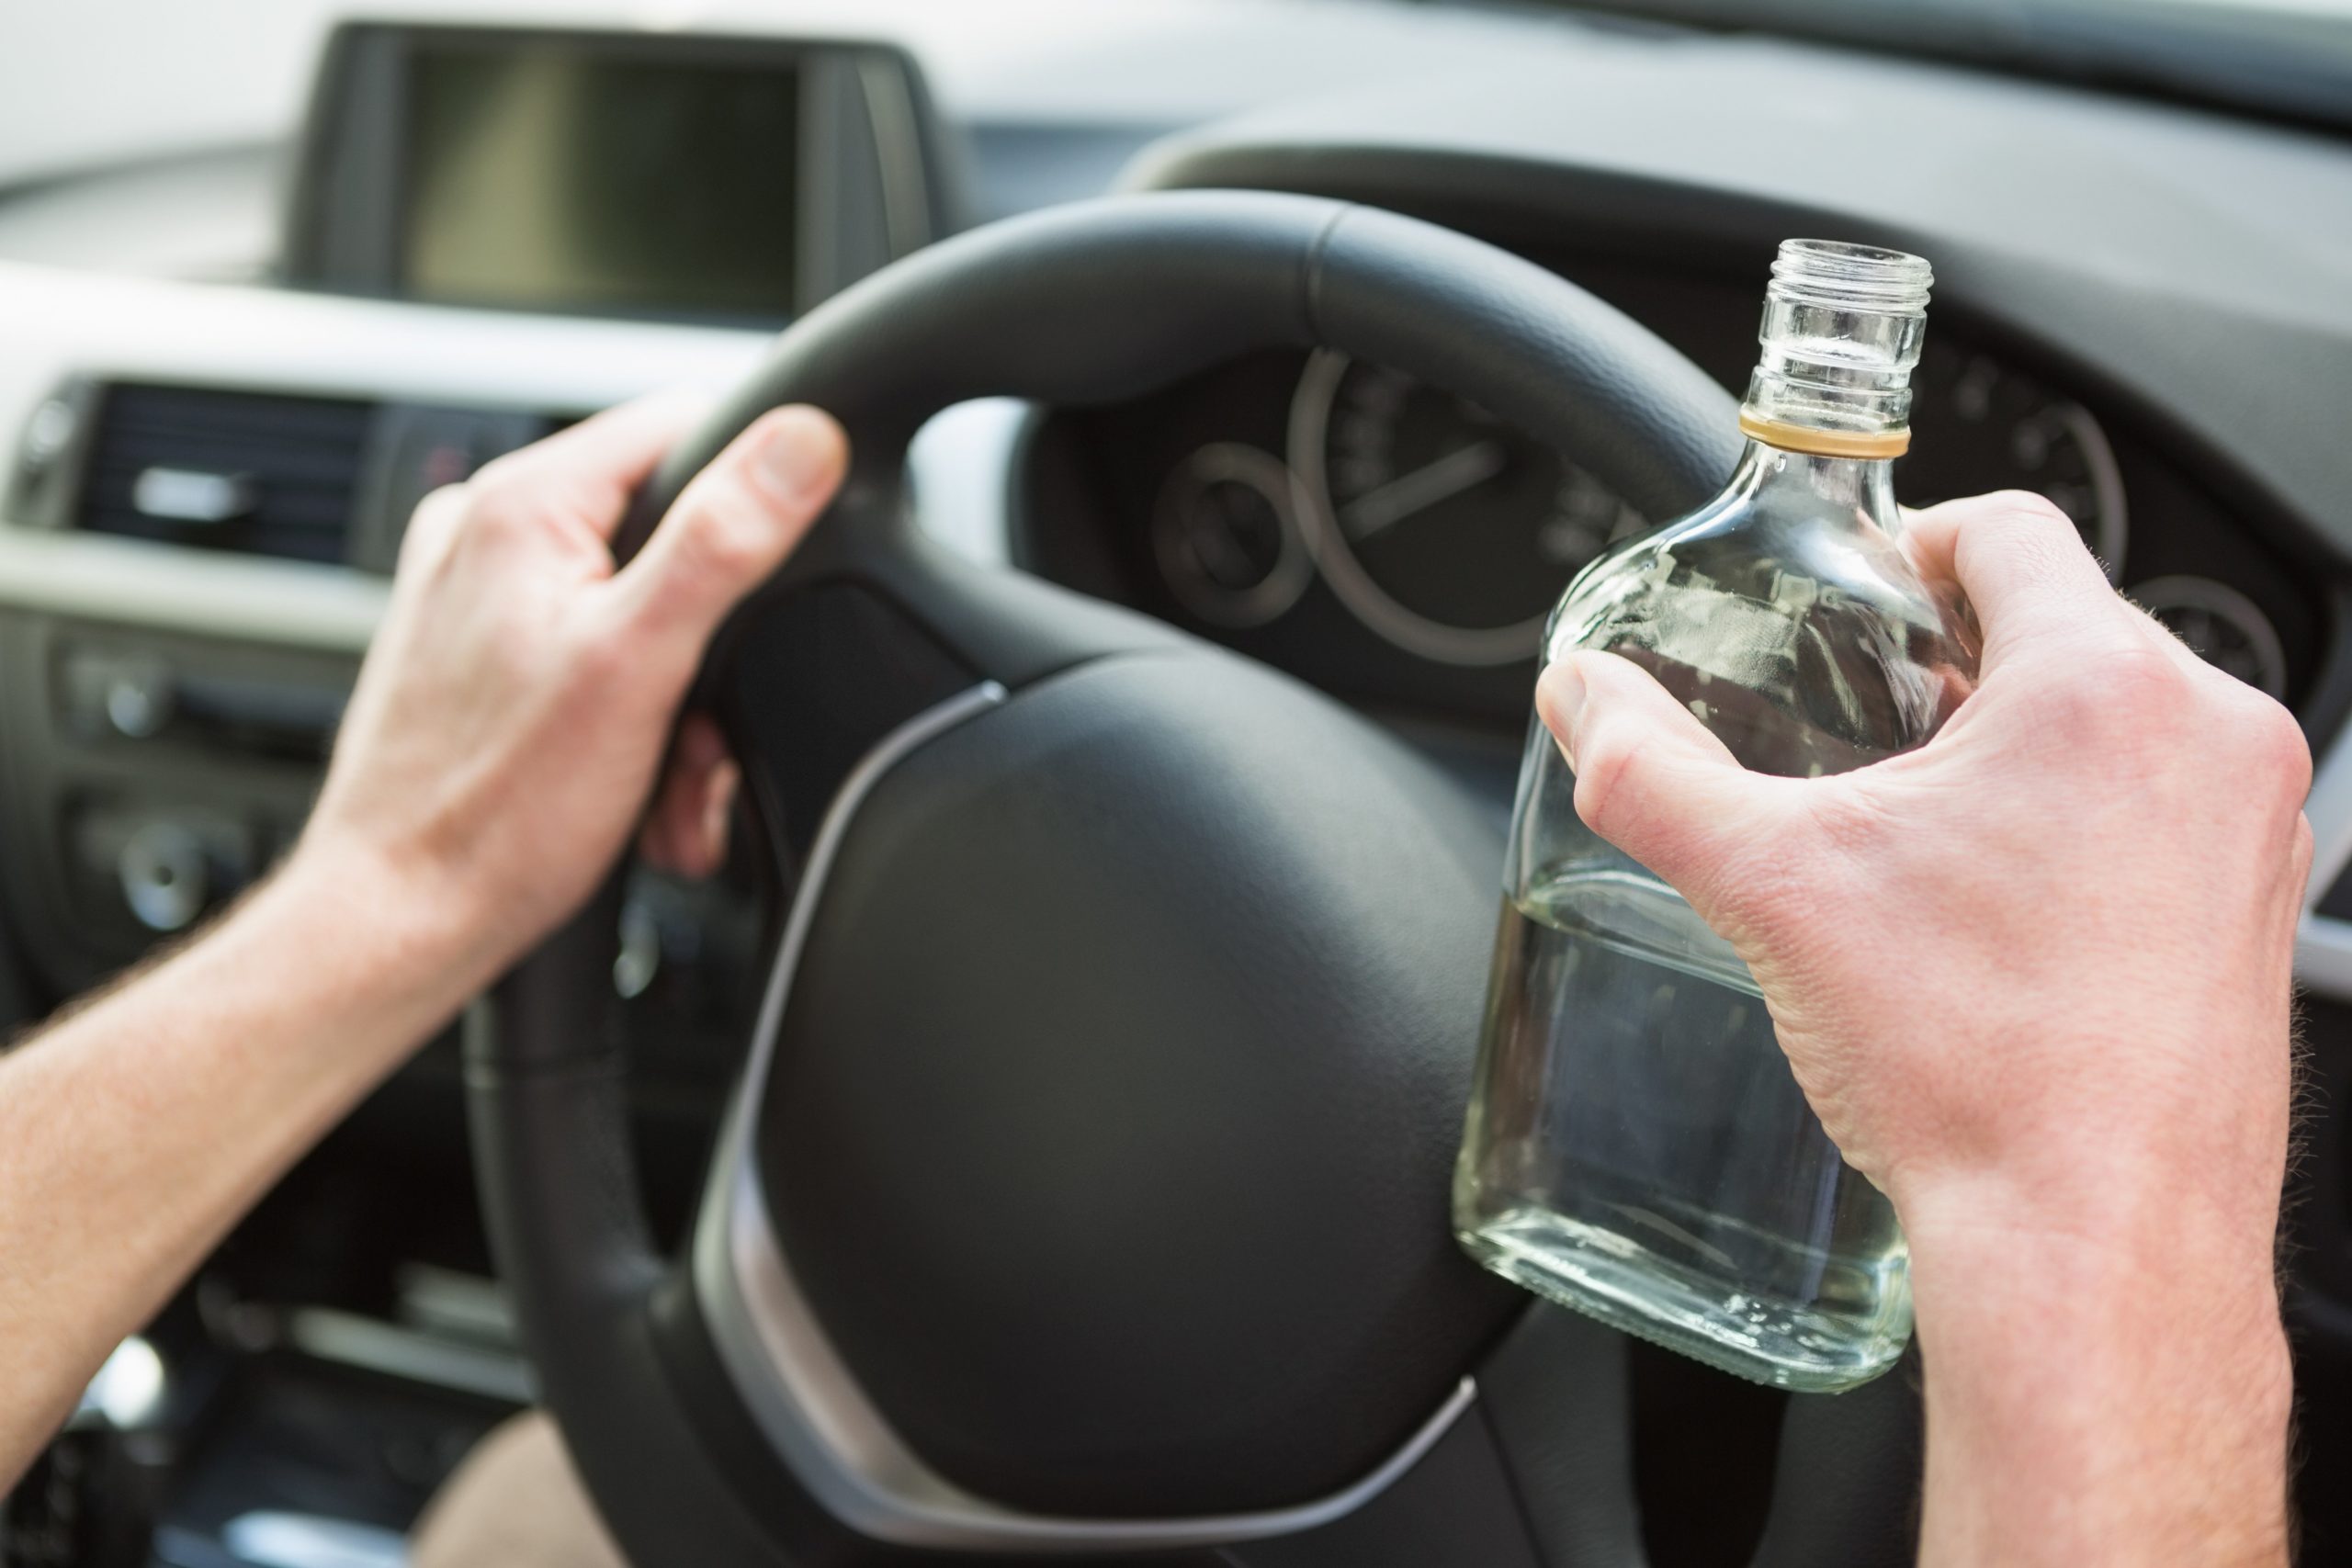 Compare Car Insurance Rates After a DUI as a Minor [2023]